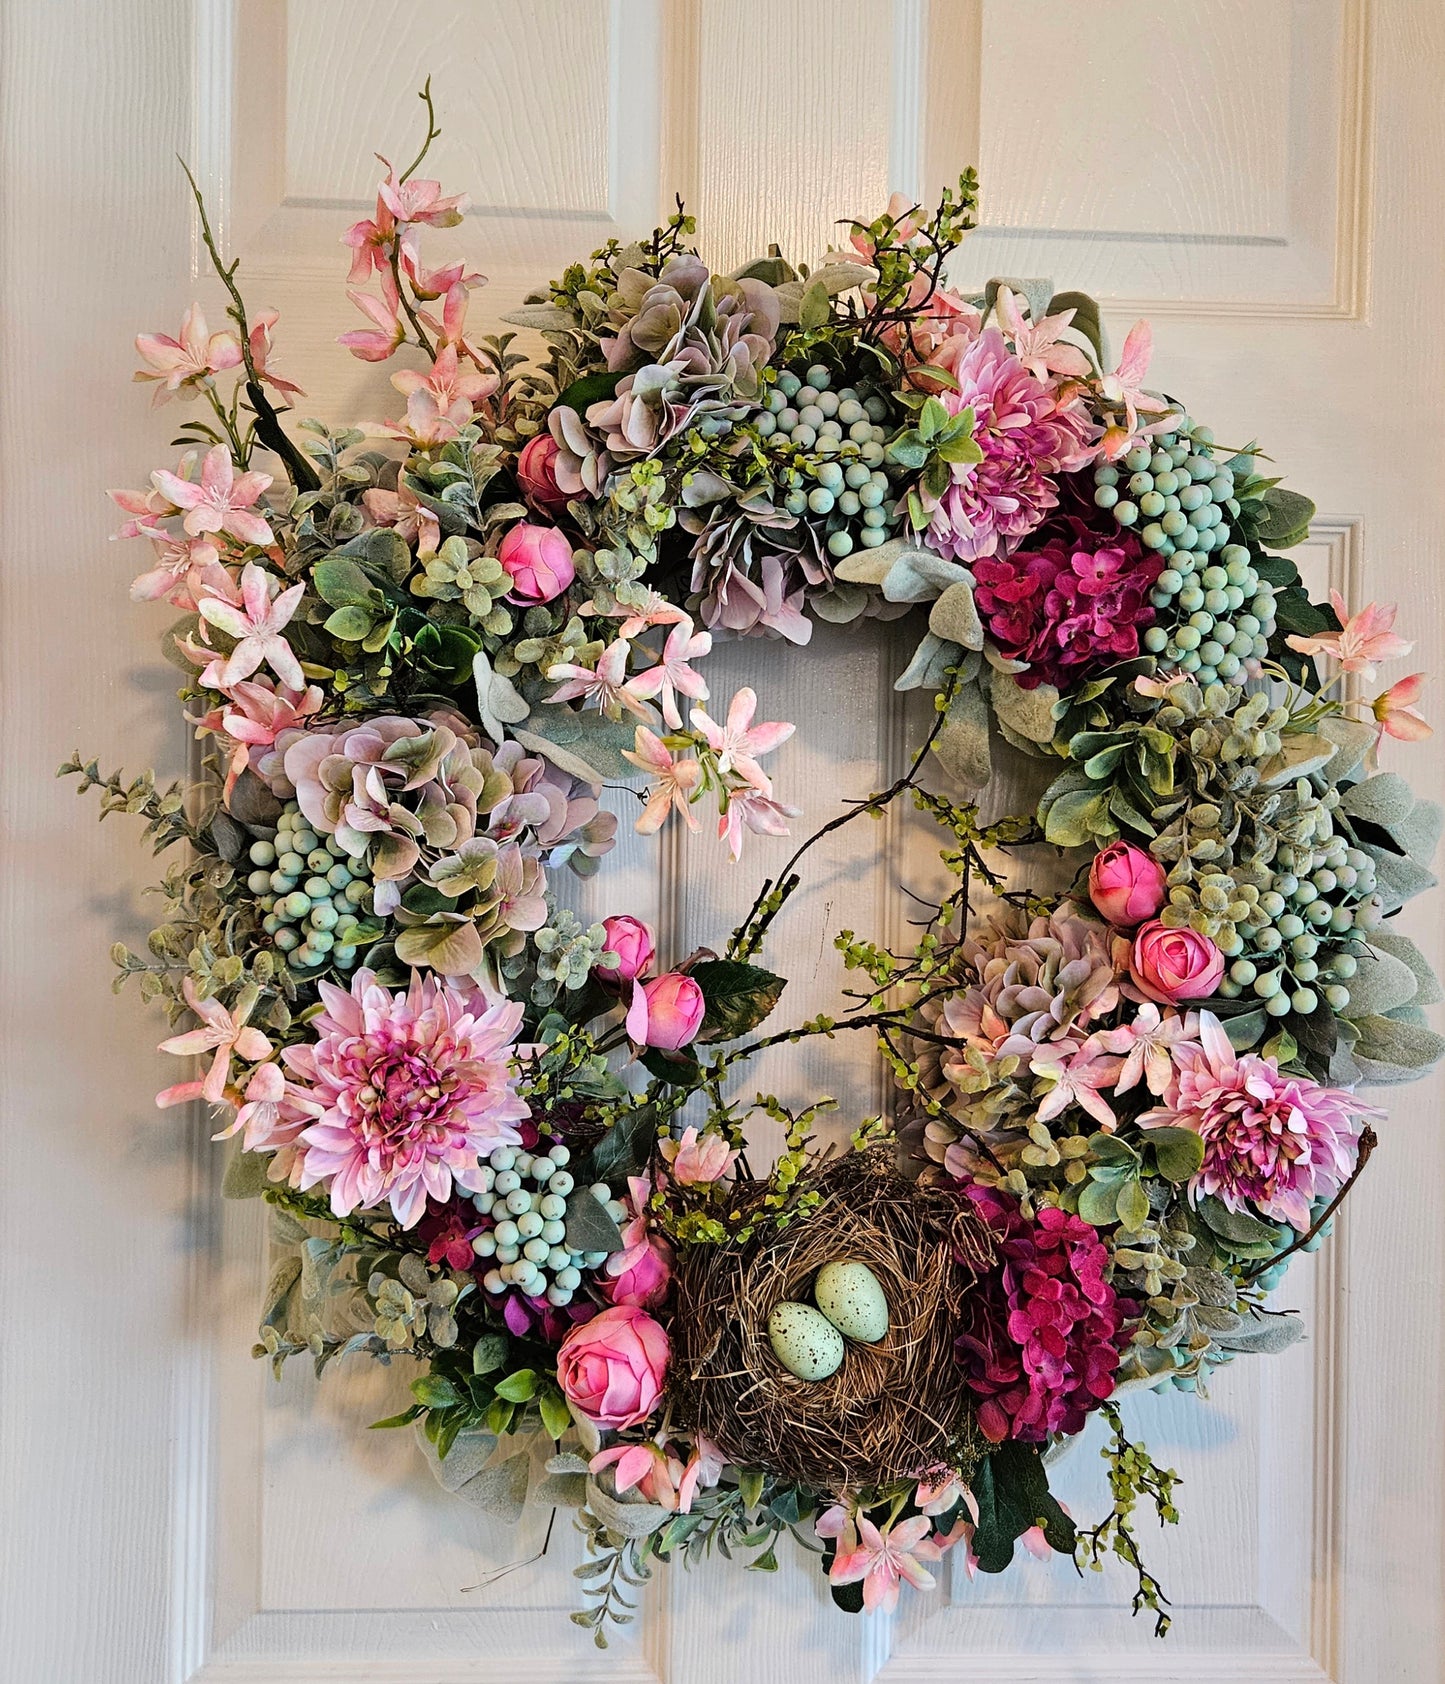 Teal And Pink Bird's Nest Wreath